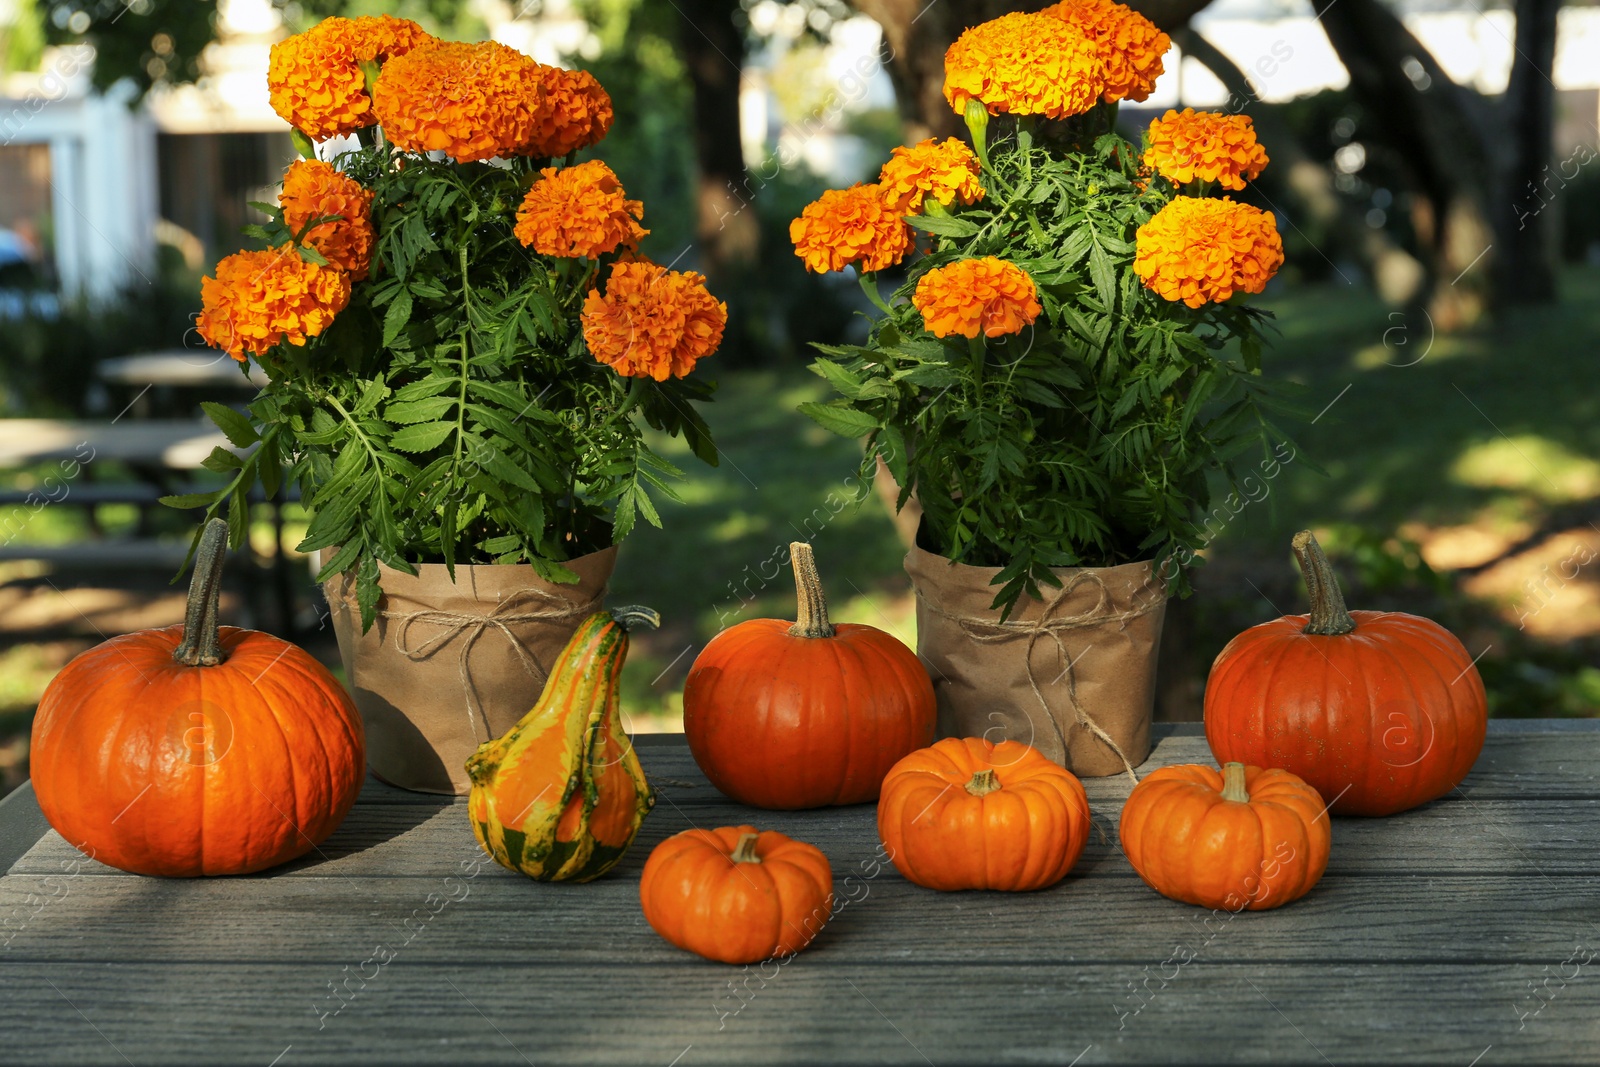 Photo of Many whole ripe pumpkins and potted marigold flowers on wooden table outdoors